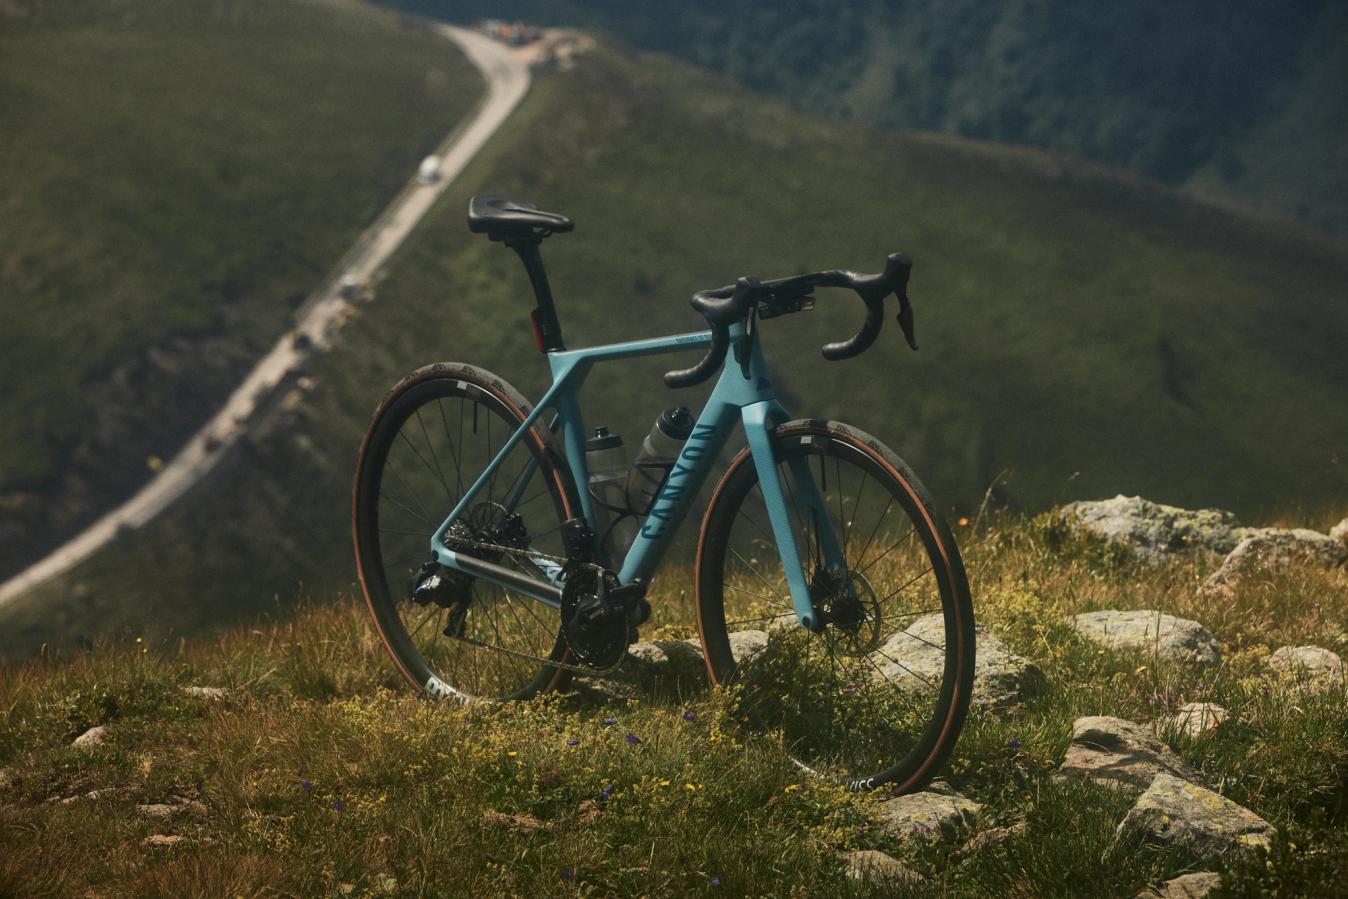 Canyon's new Endurace is among the endurance bikes leaning into off-road